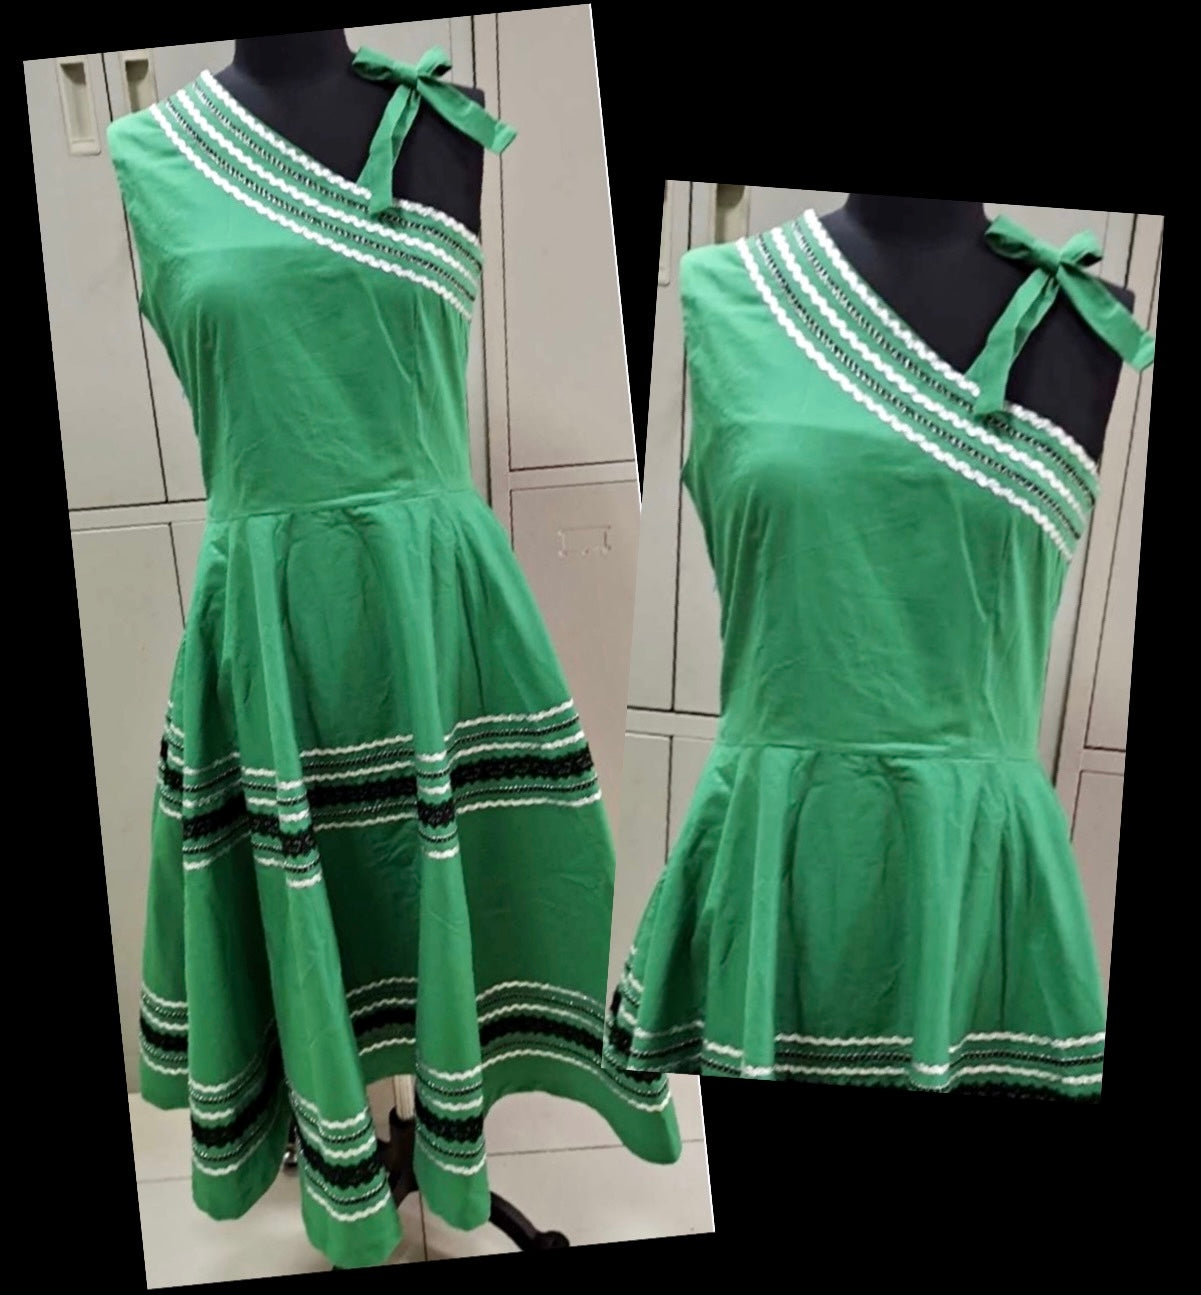 Patio dress vintage 1950s style one shoulder Mexican full circle dress in green